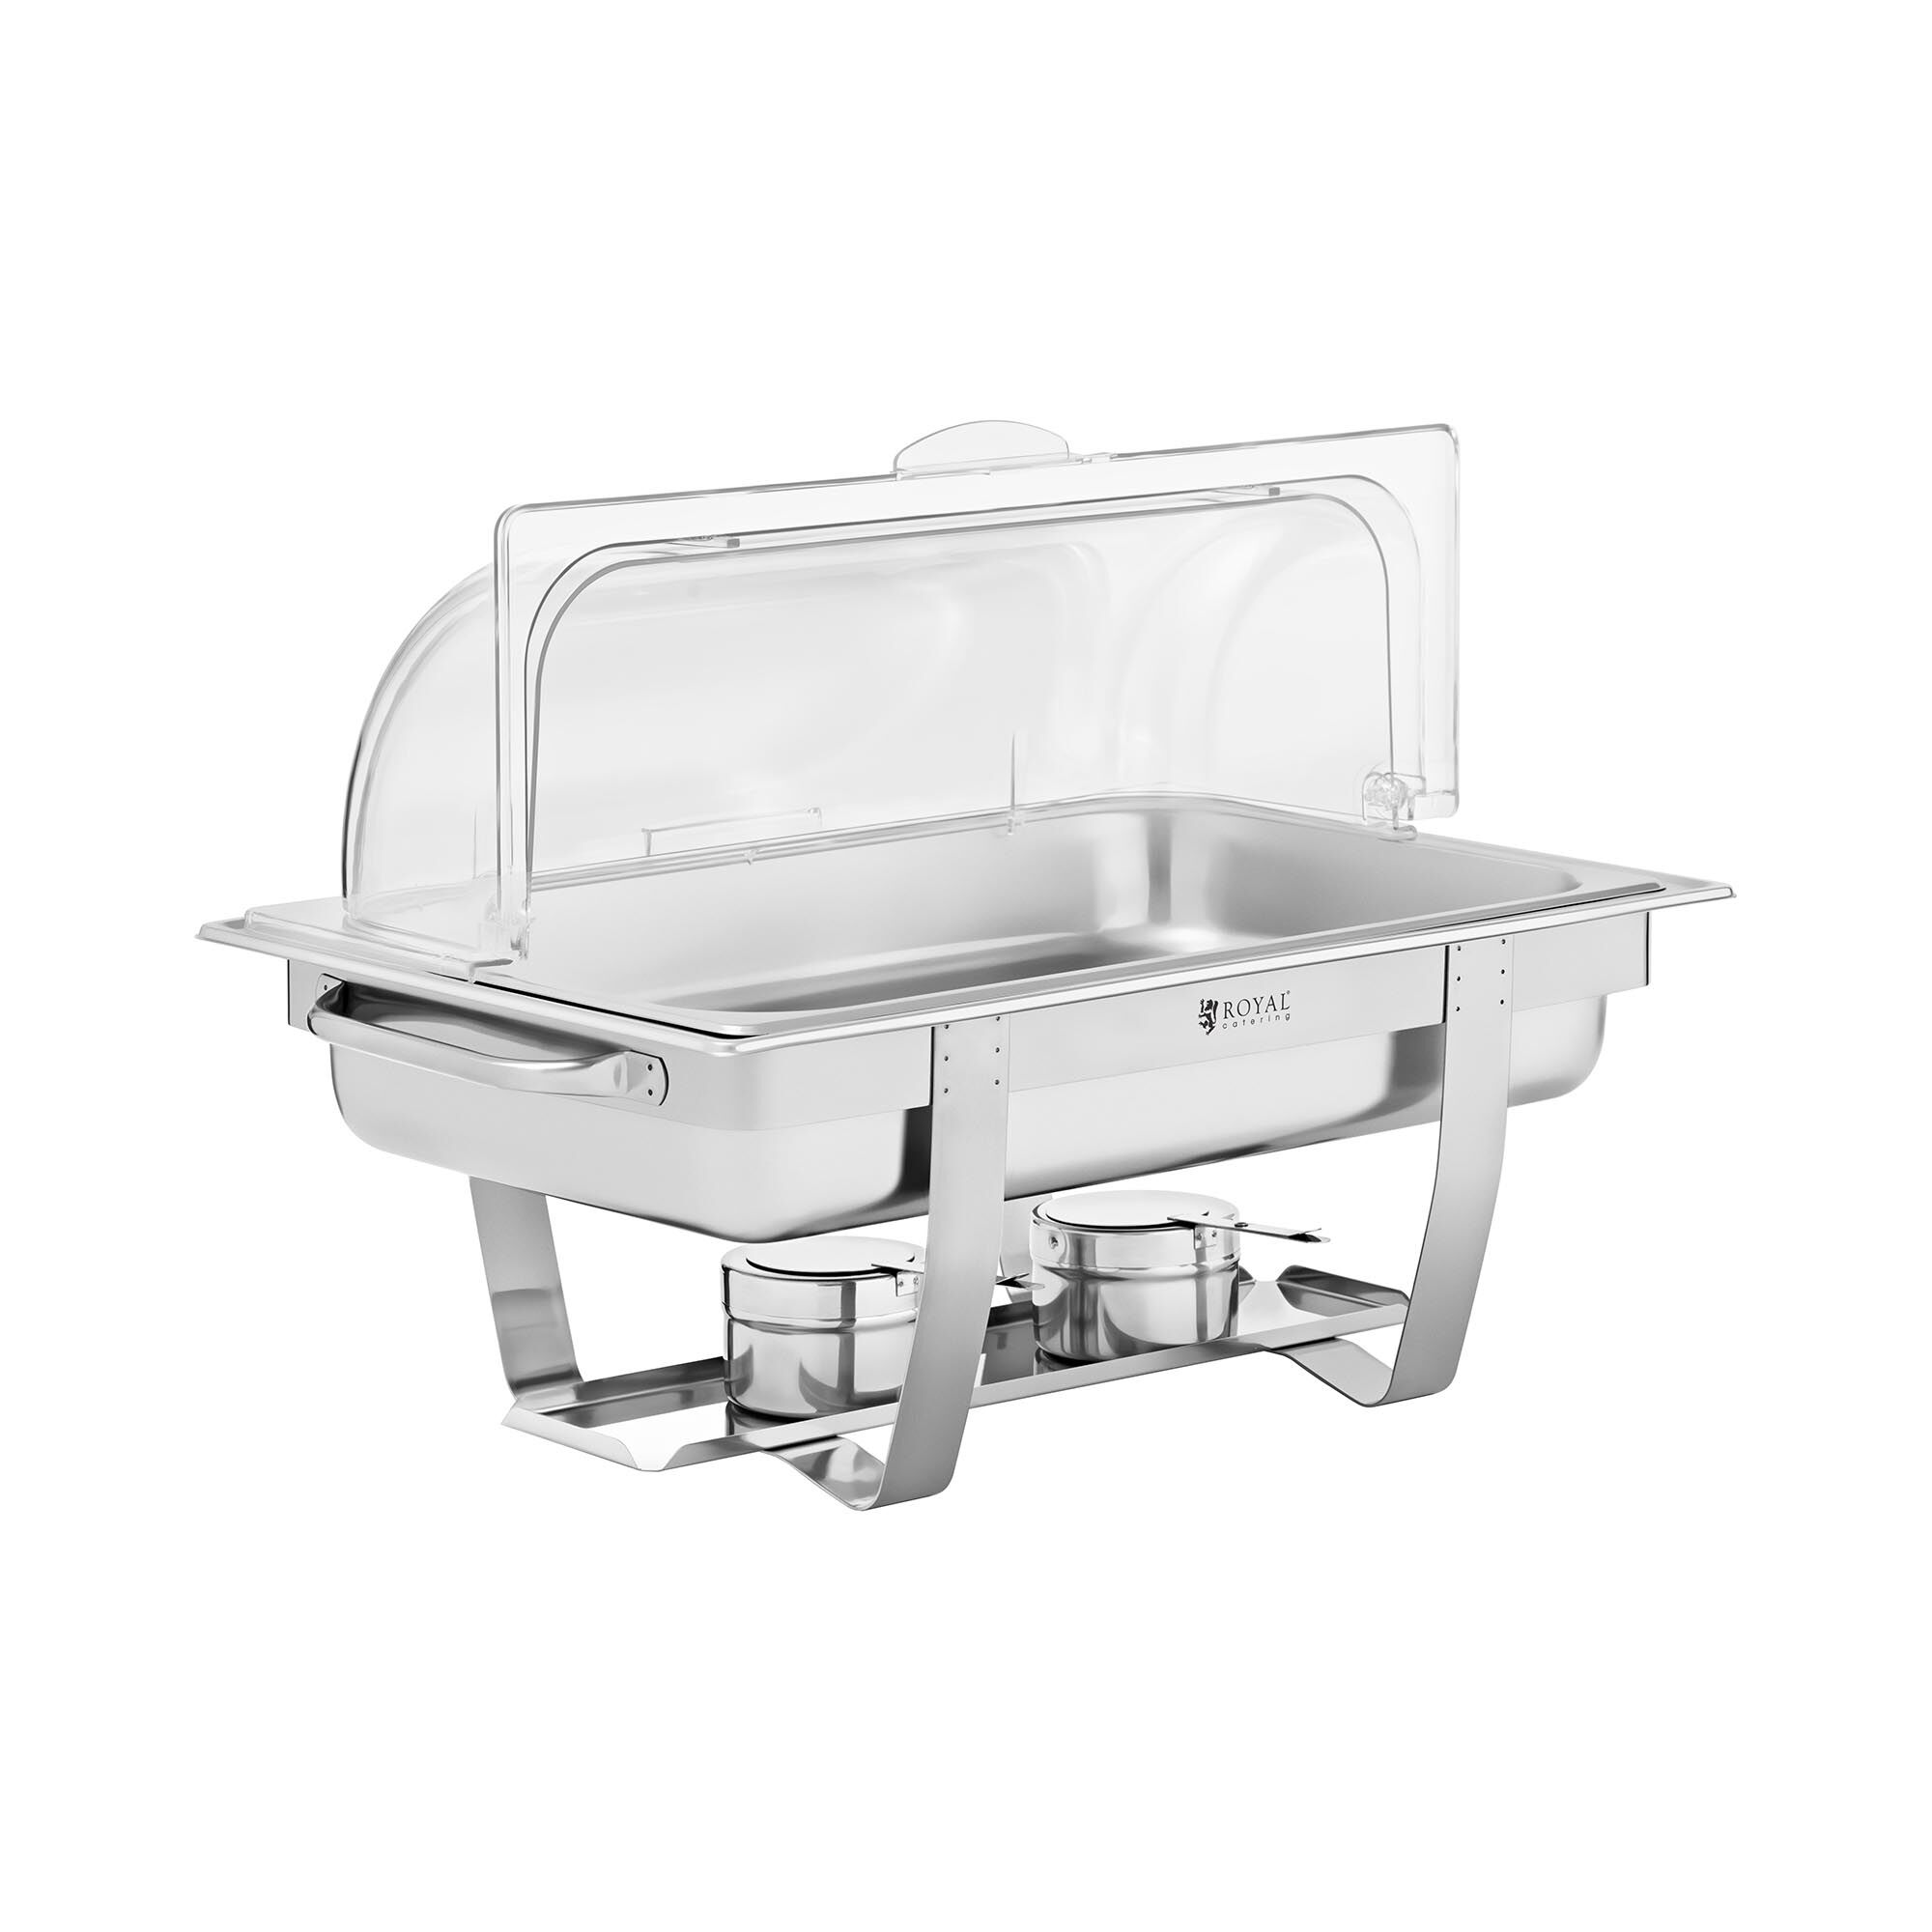 Royal Catering Chafing Dish - GN 1/1 - Royal Catering - 8,5 L - schmaler Stand